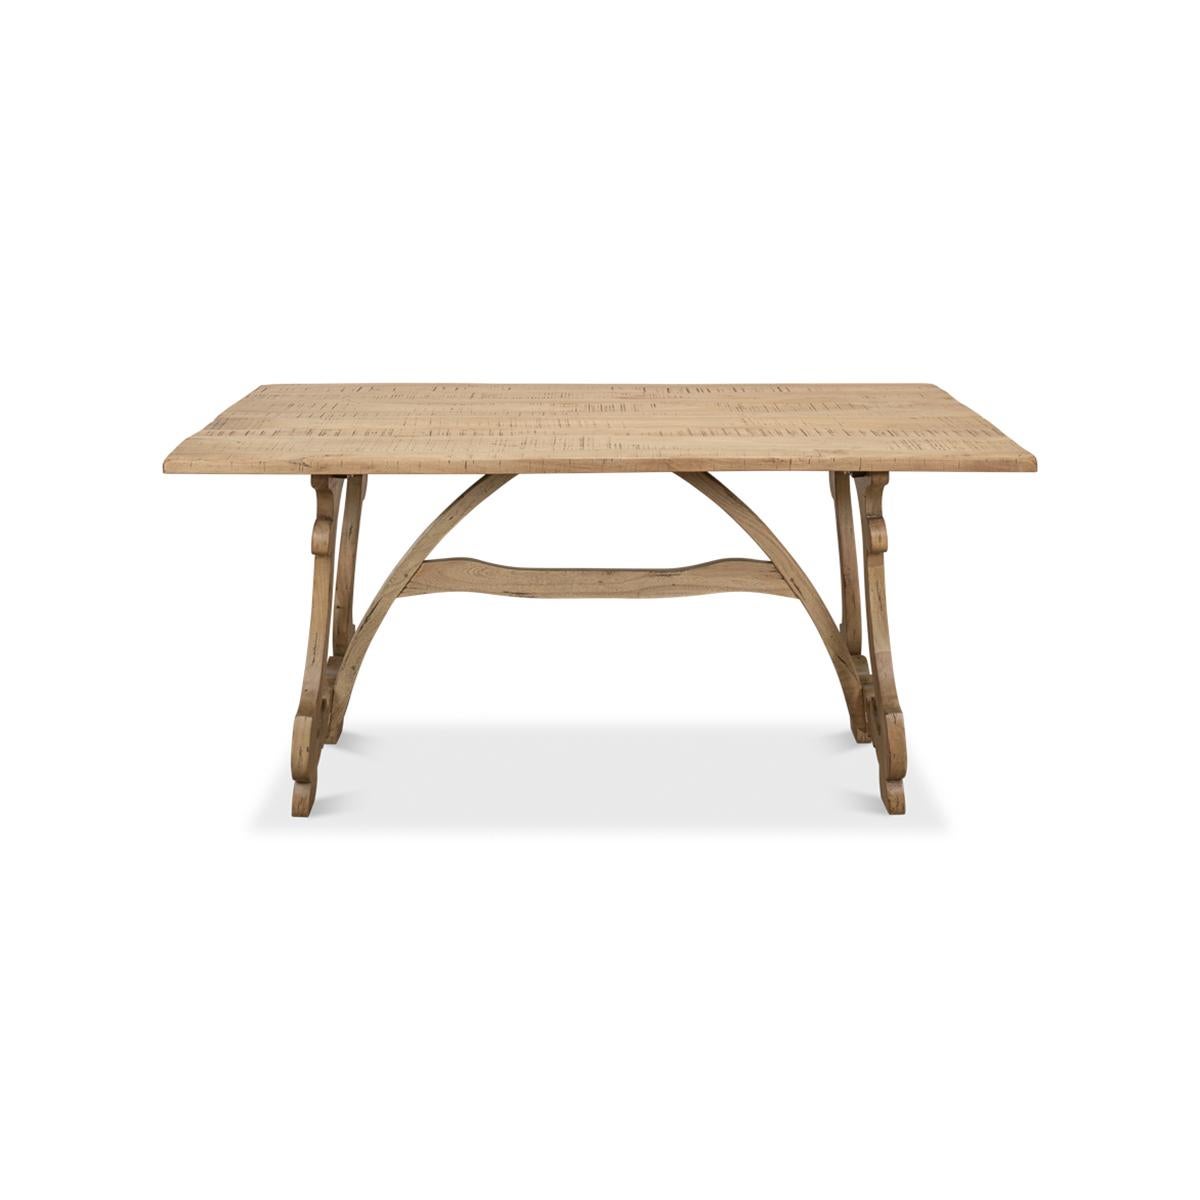 Dining Table in an unusual light drift walnut finish, with plank board top above a trestle end base with a stretcher.

Dimensions: 63